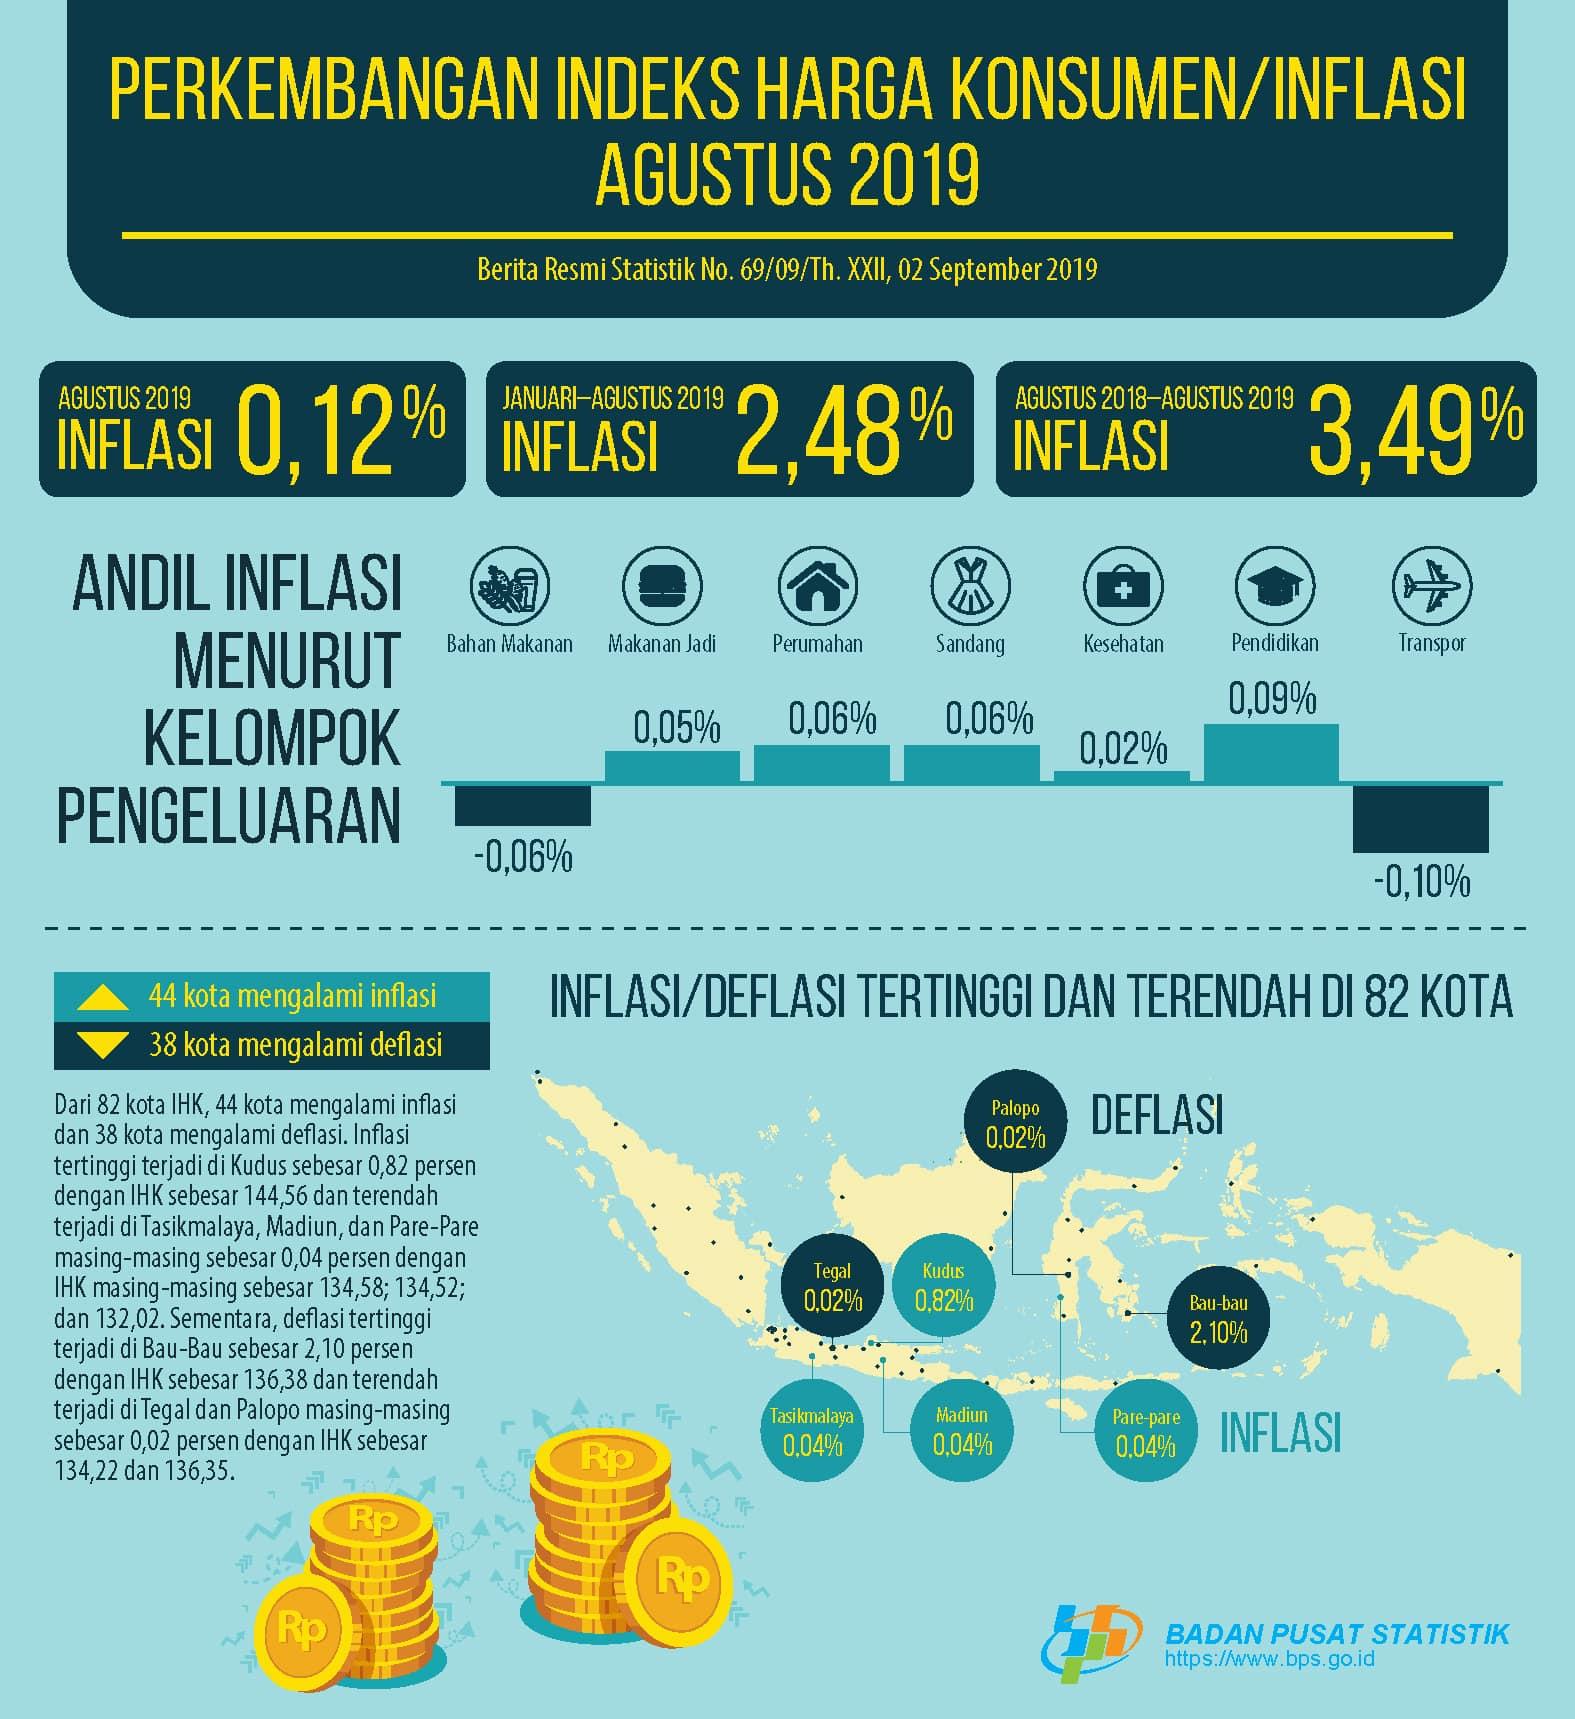 Inflation in August 2019 was 0.12 percent. The highest Inflation occurred in Kudus at 0.82 percent